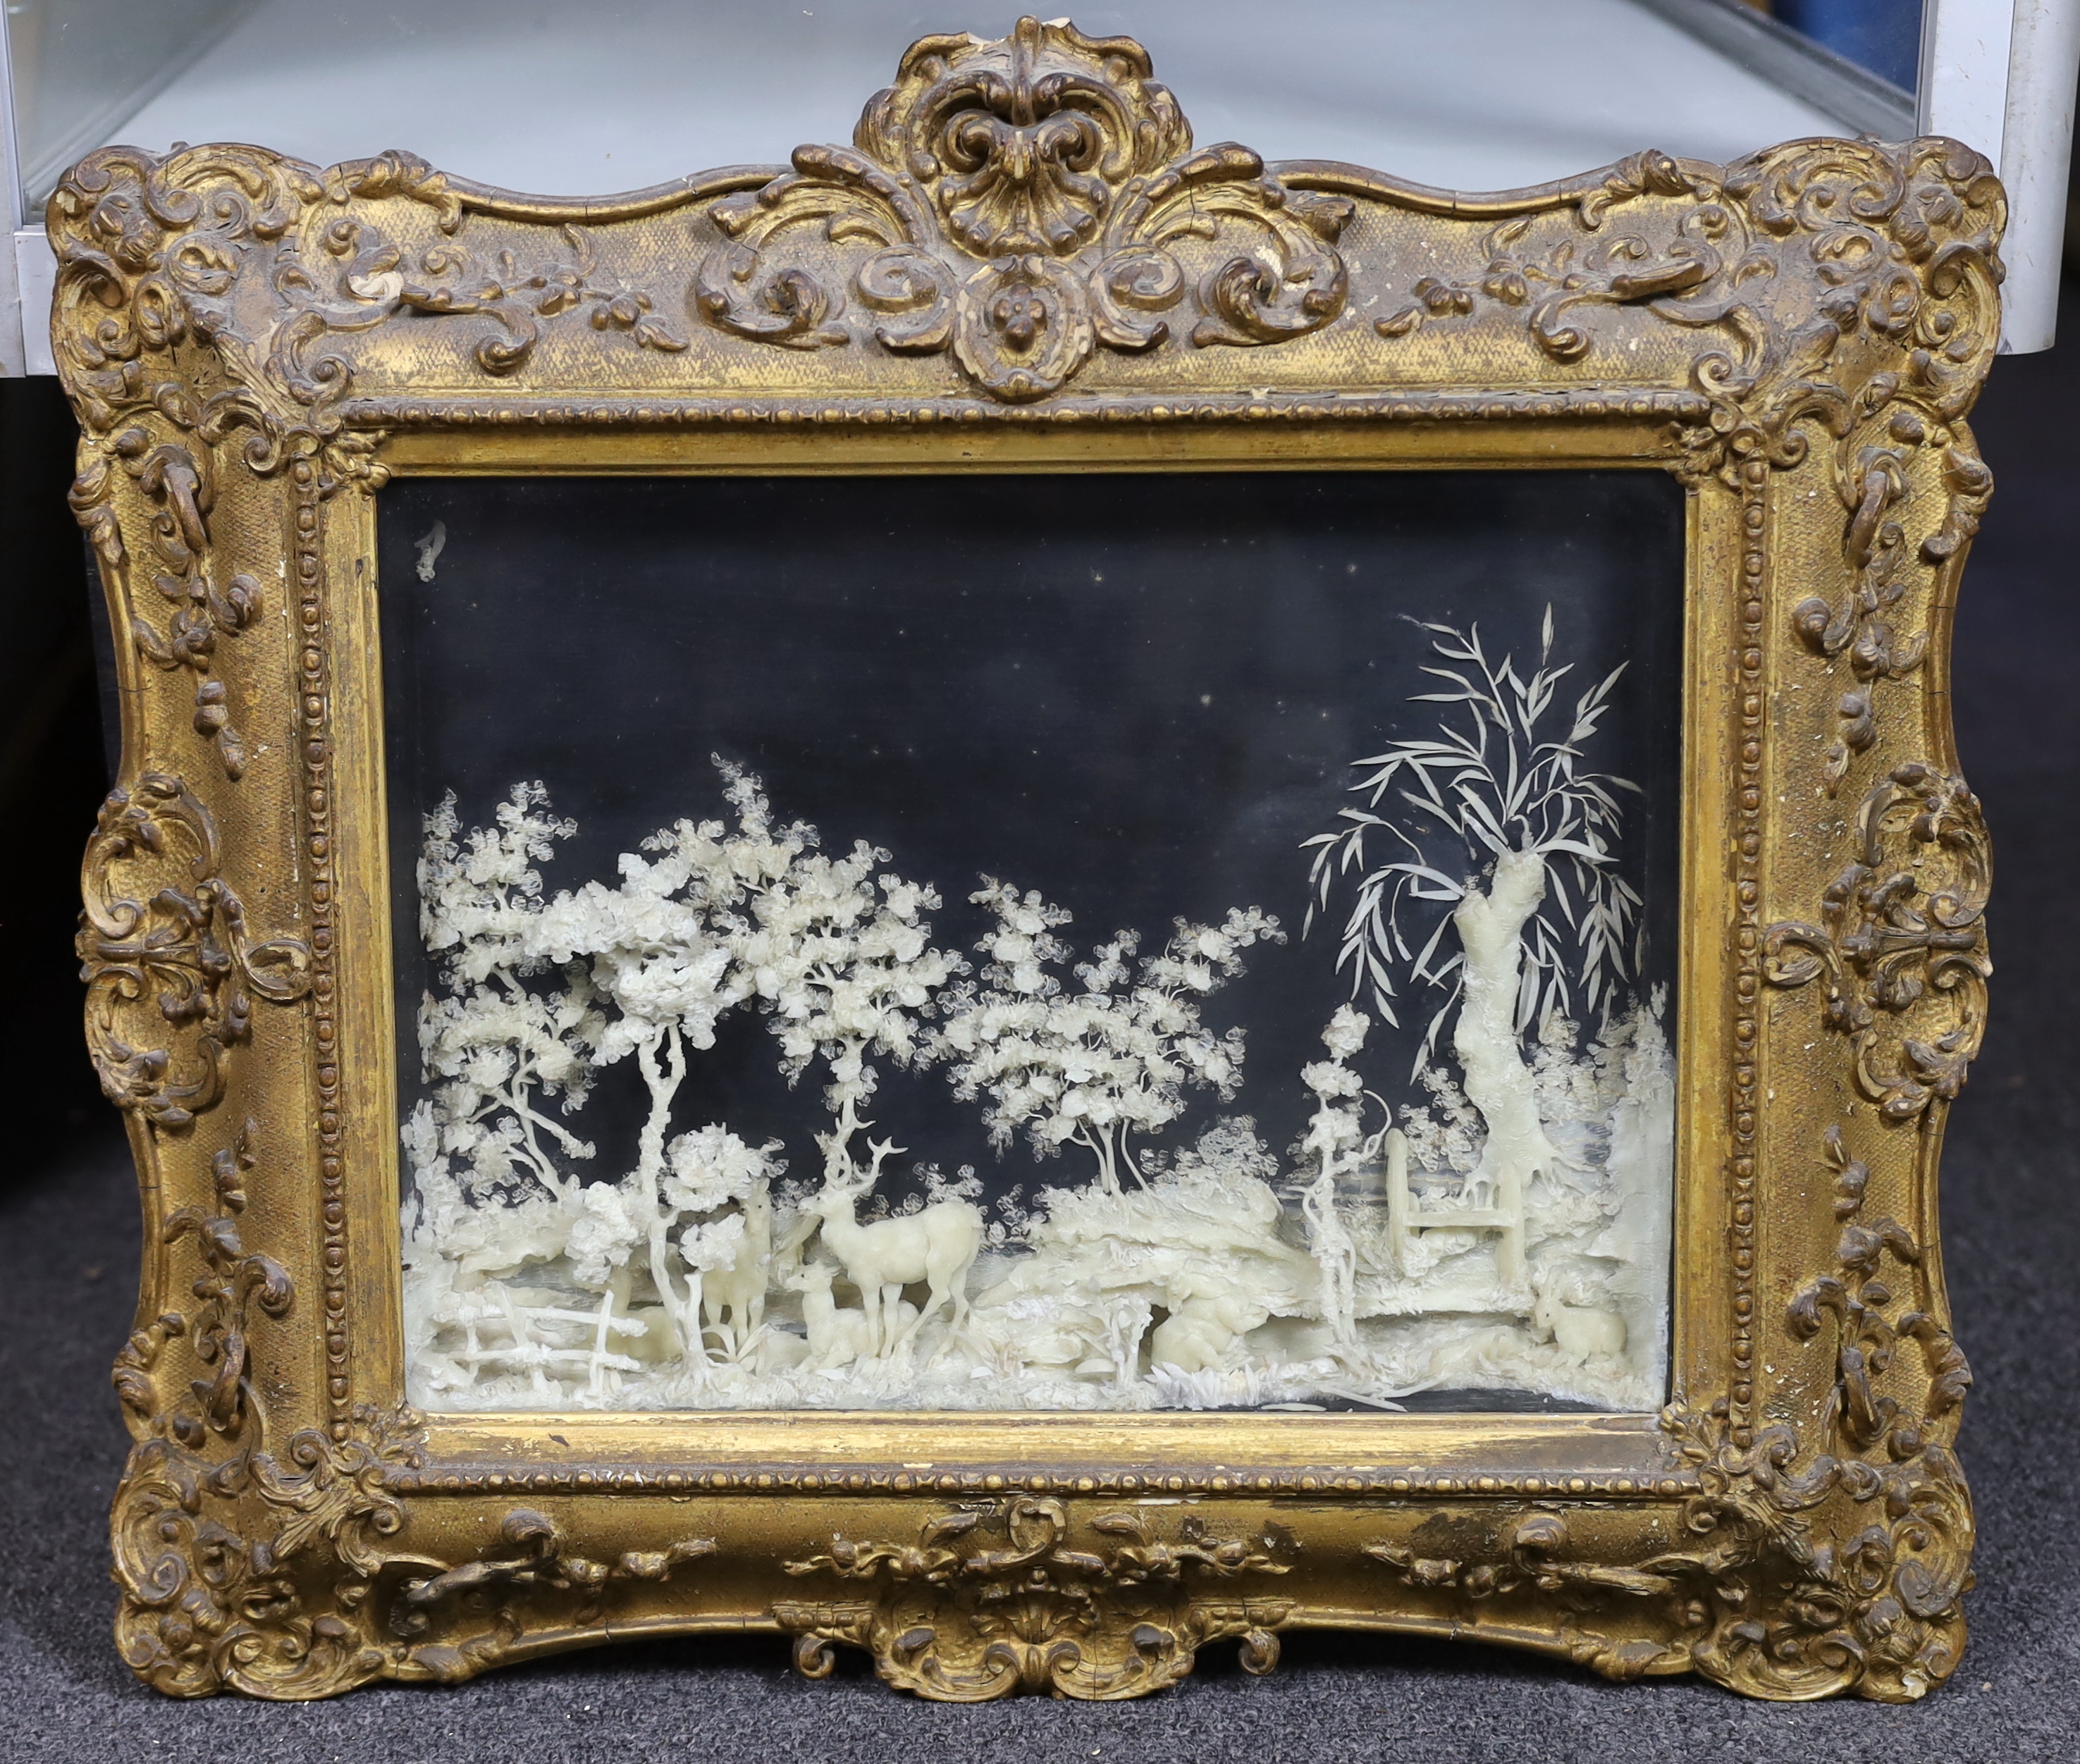 A rare pair of mid 19th century carved wax pictures, depicting sportsman and dogs in a wetland - Image 3 of 8